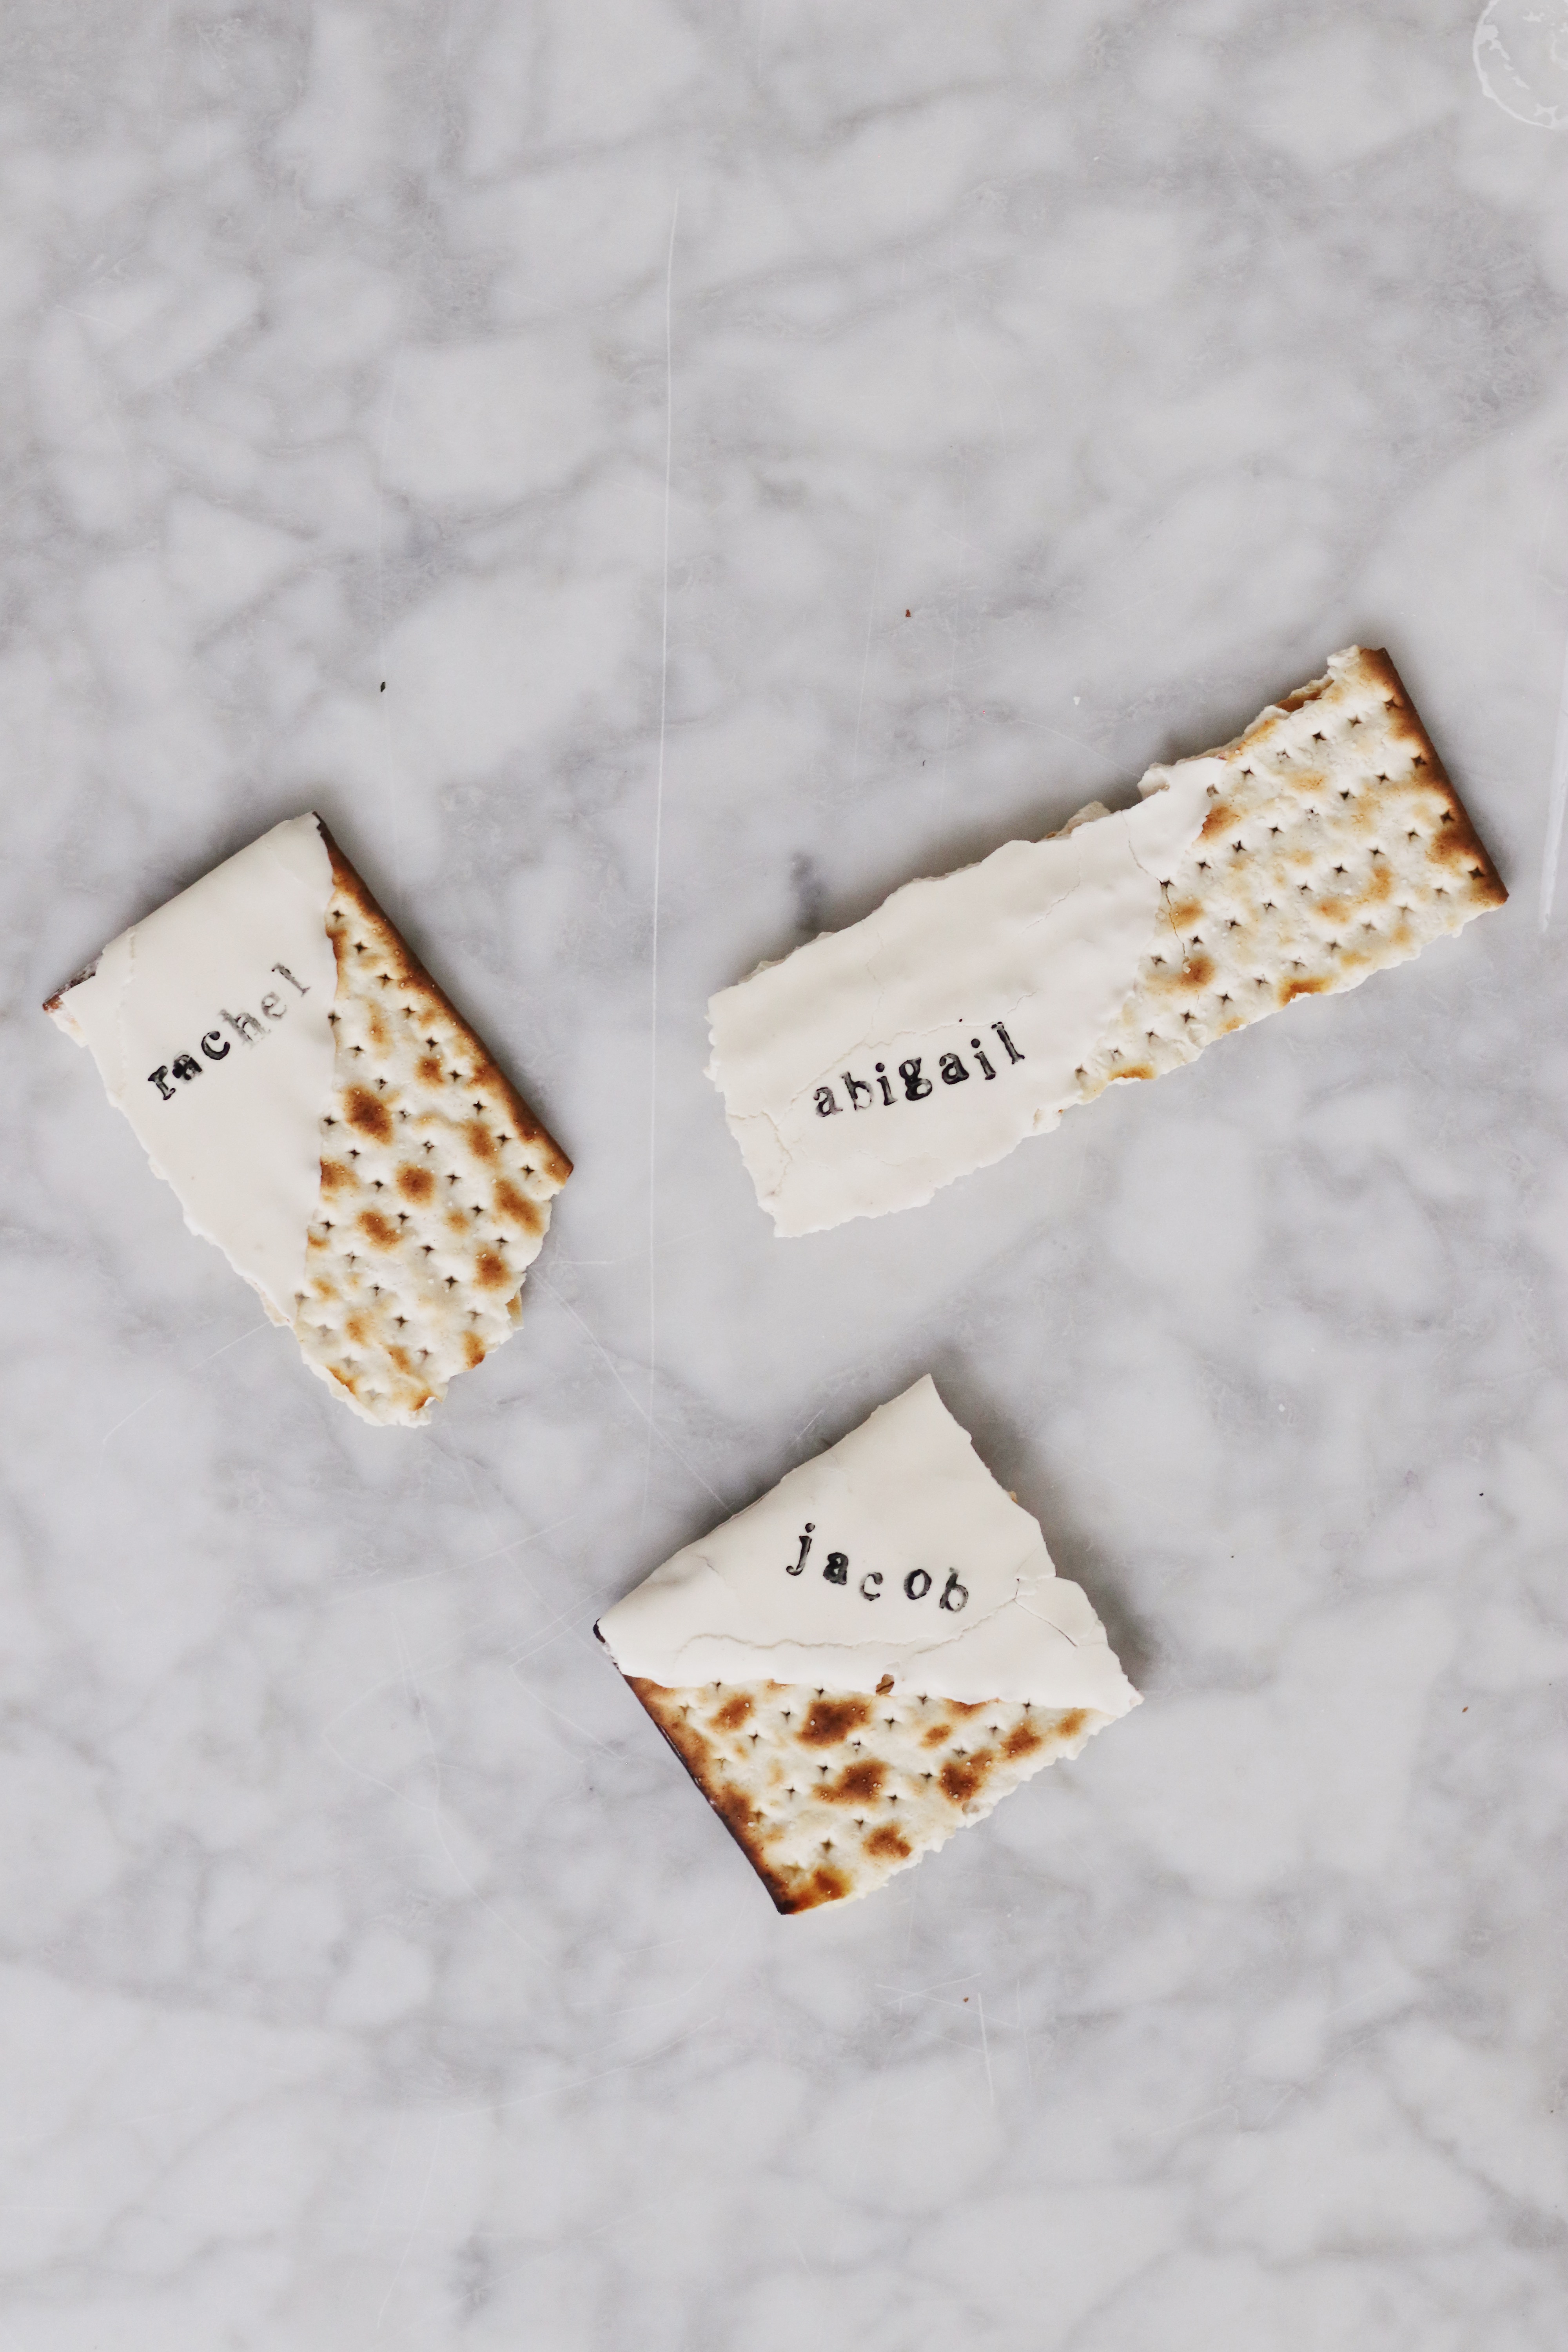 Stamped Matzo Place Cards